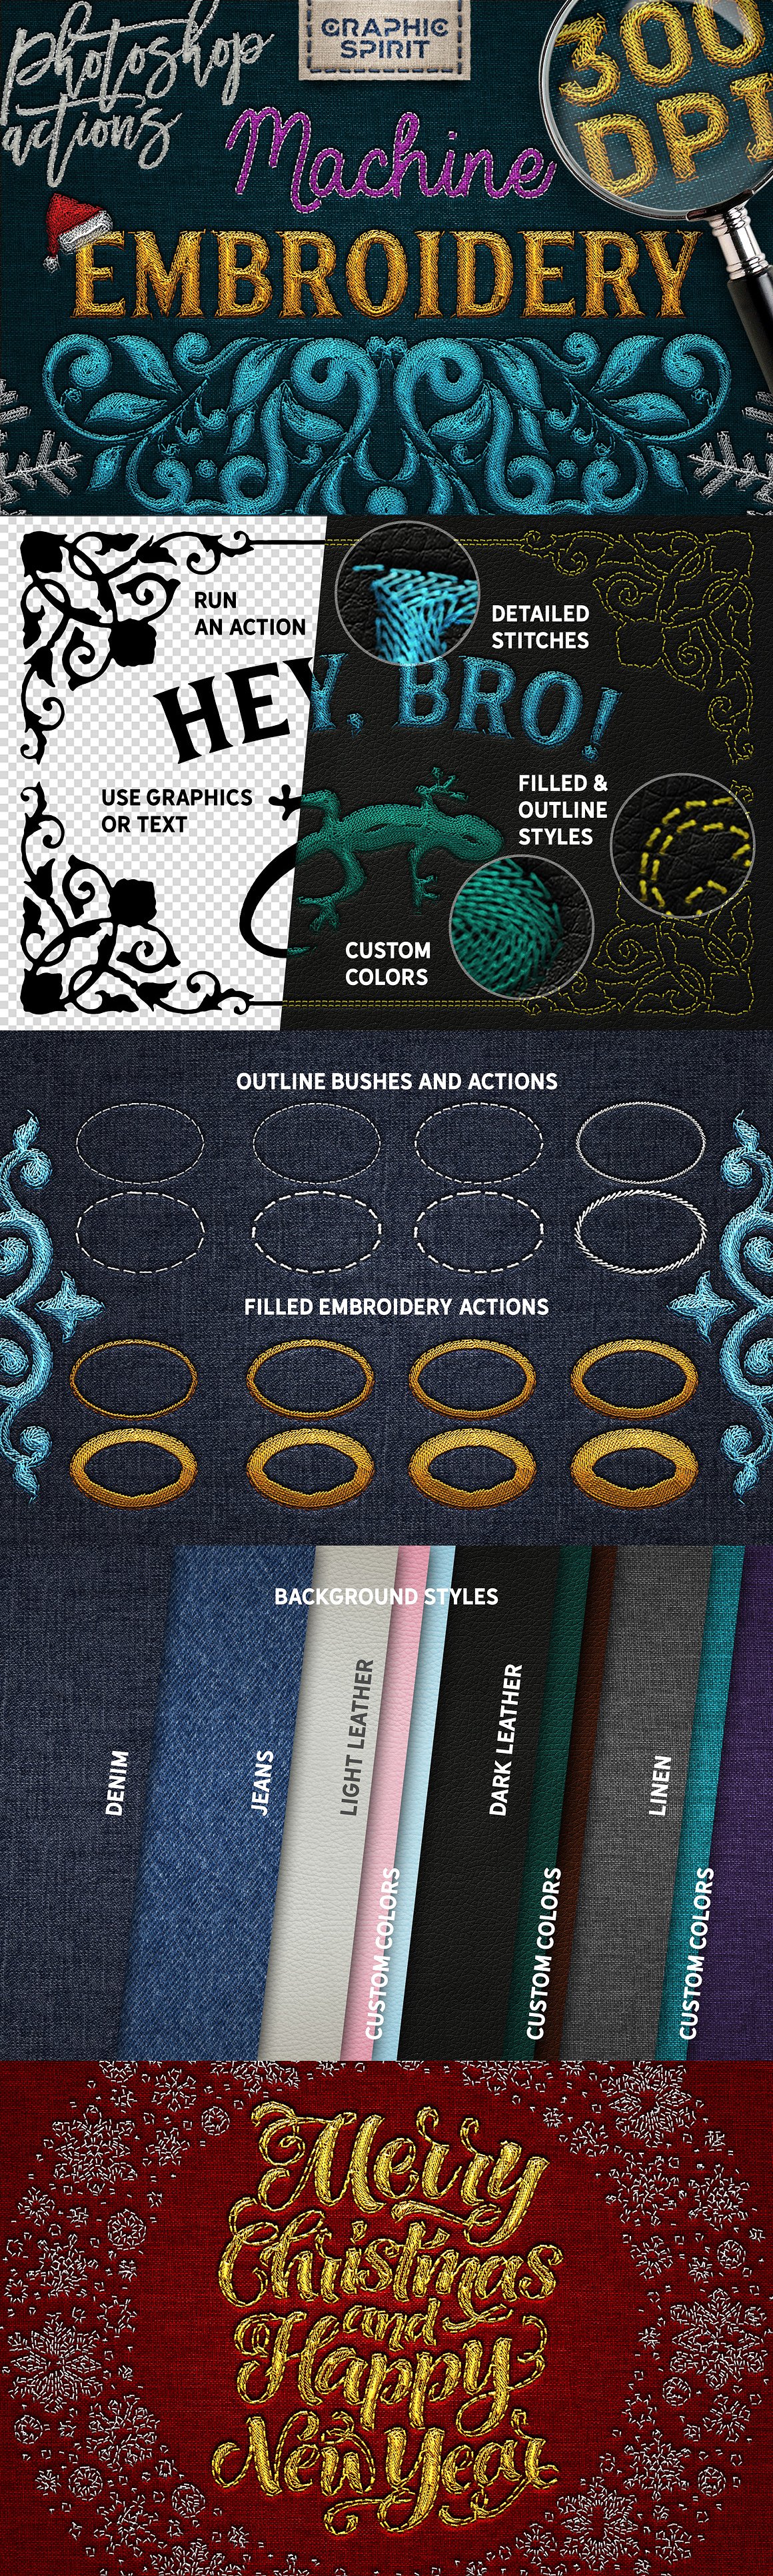 _embroidery-photoshop-actions0-.jpg